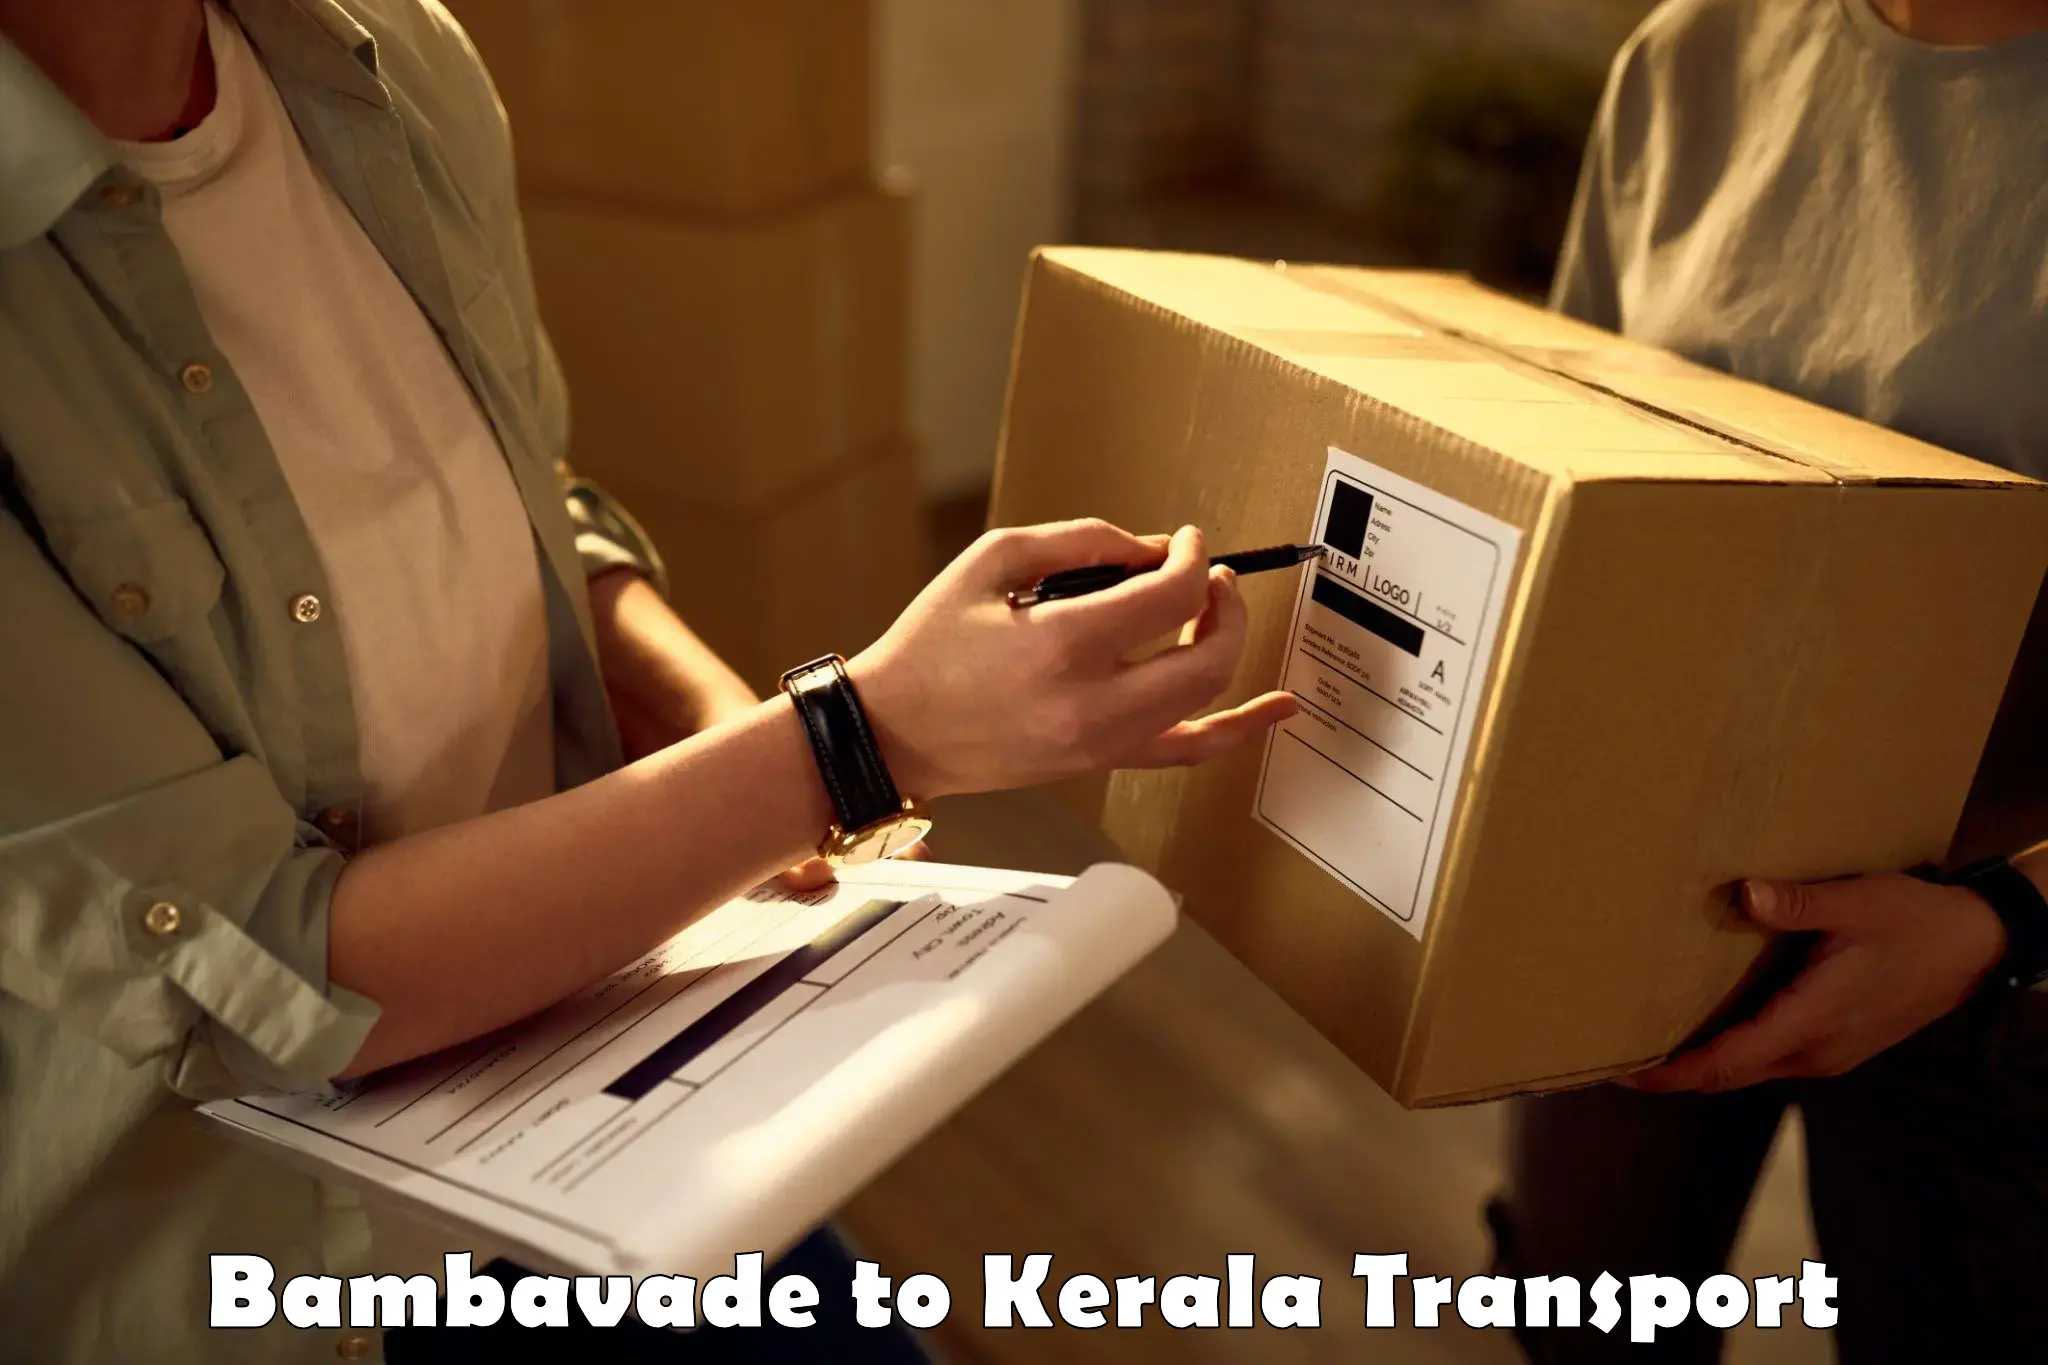 Delivery service Bambavade to Rajamudy